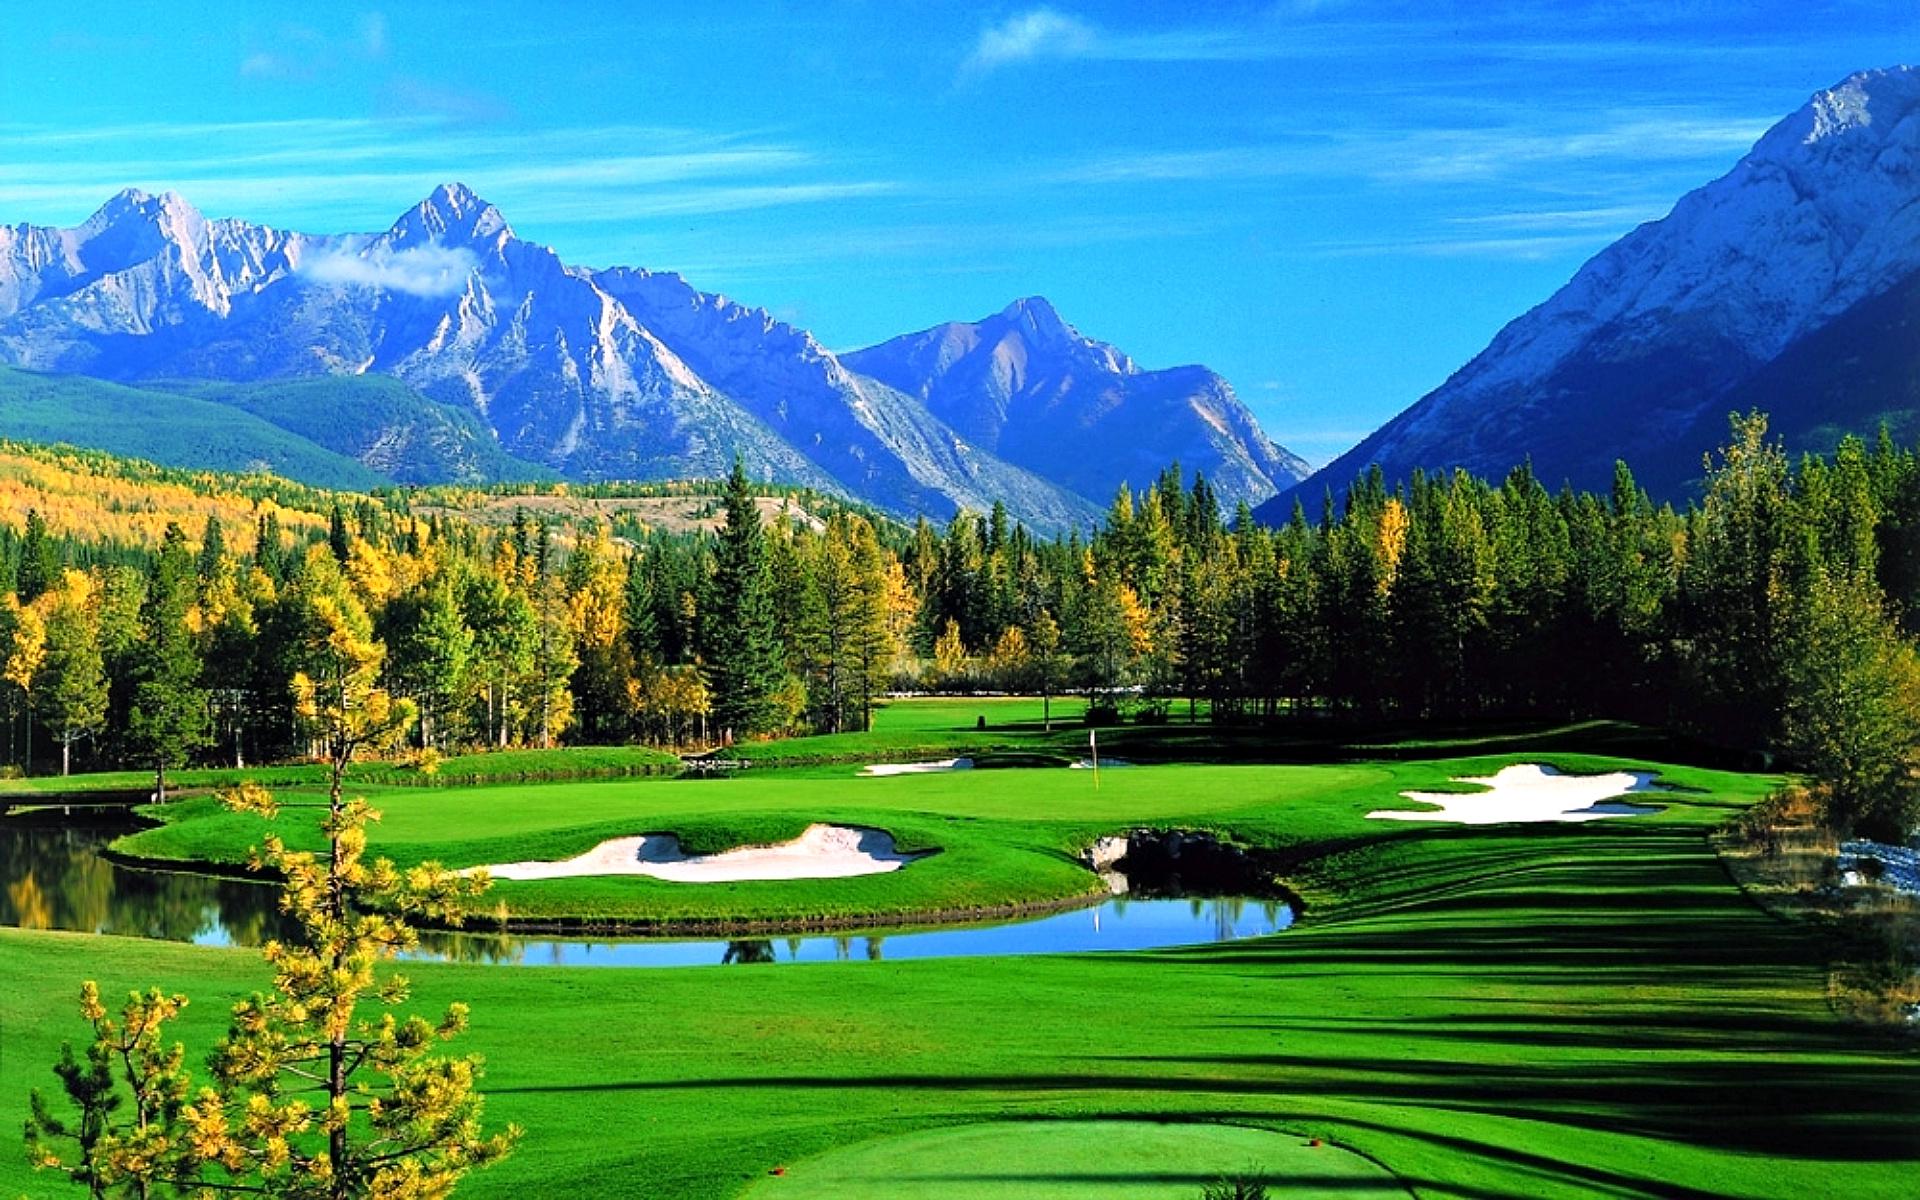 Golf Course High Quality And Resolution Wallpaper